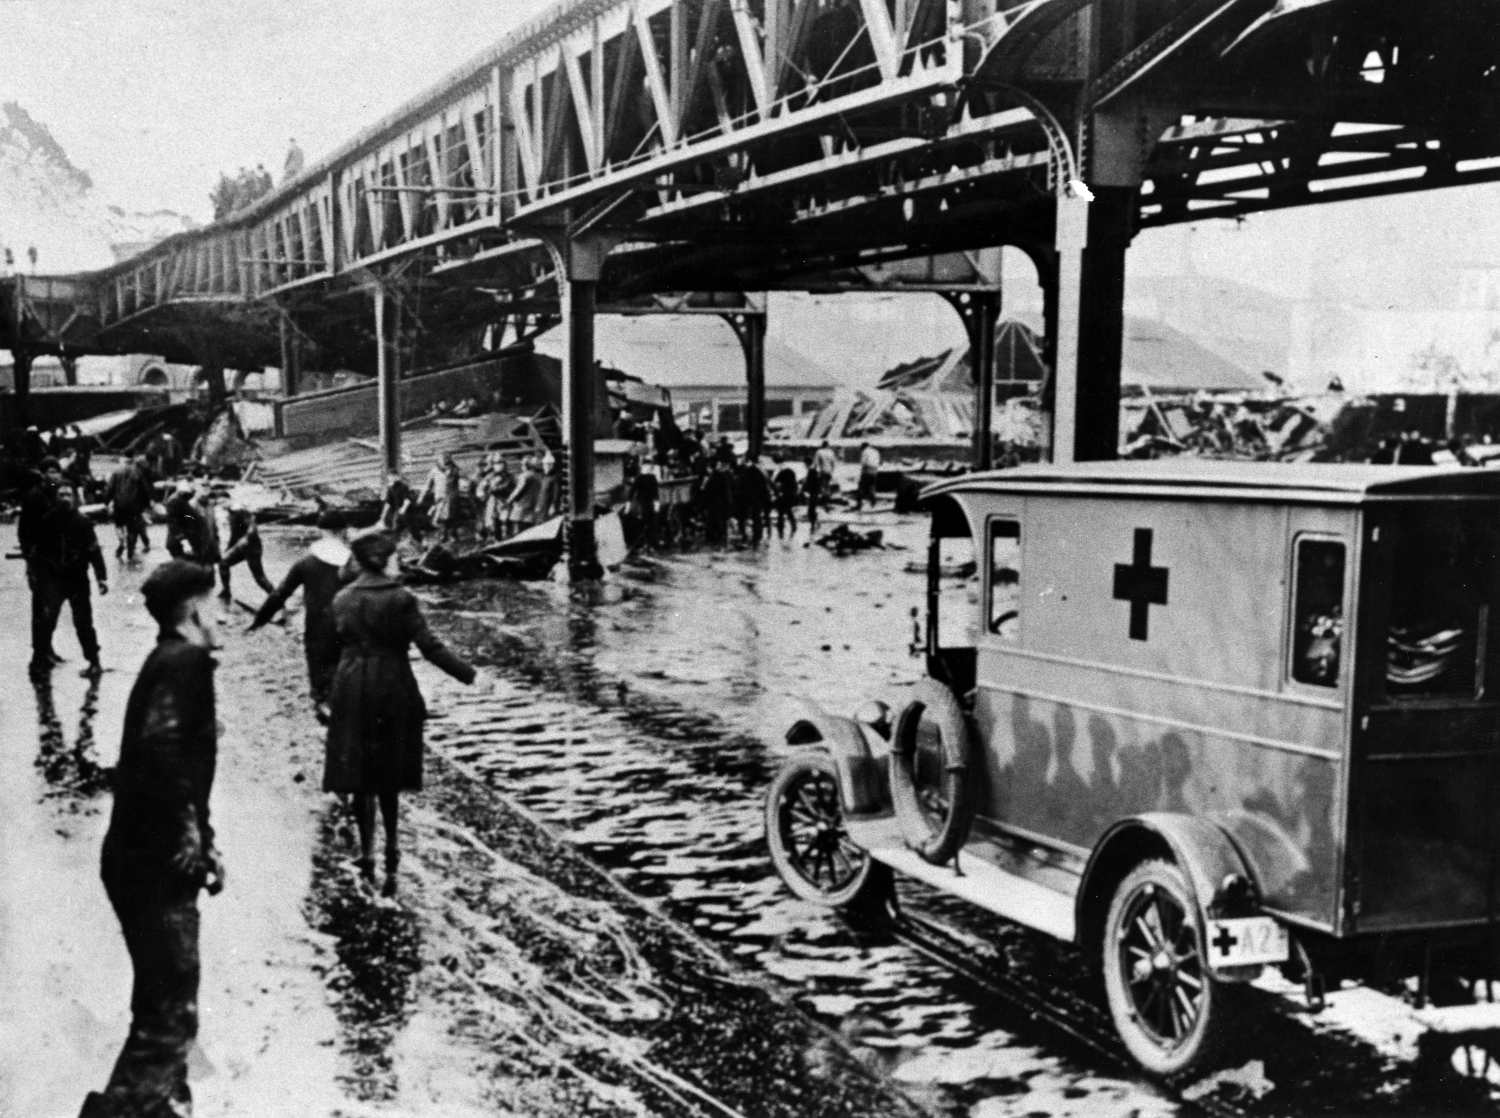 The Great Molasses Flood of 1919 took out a train platform during the accident